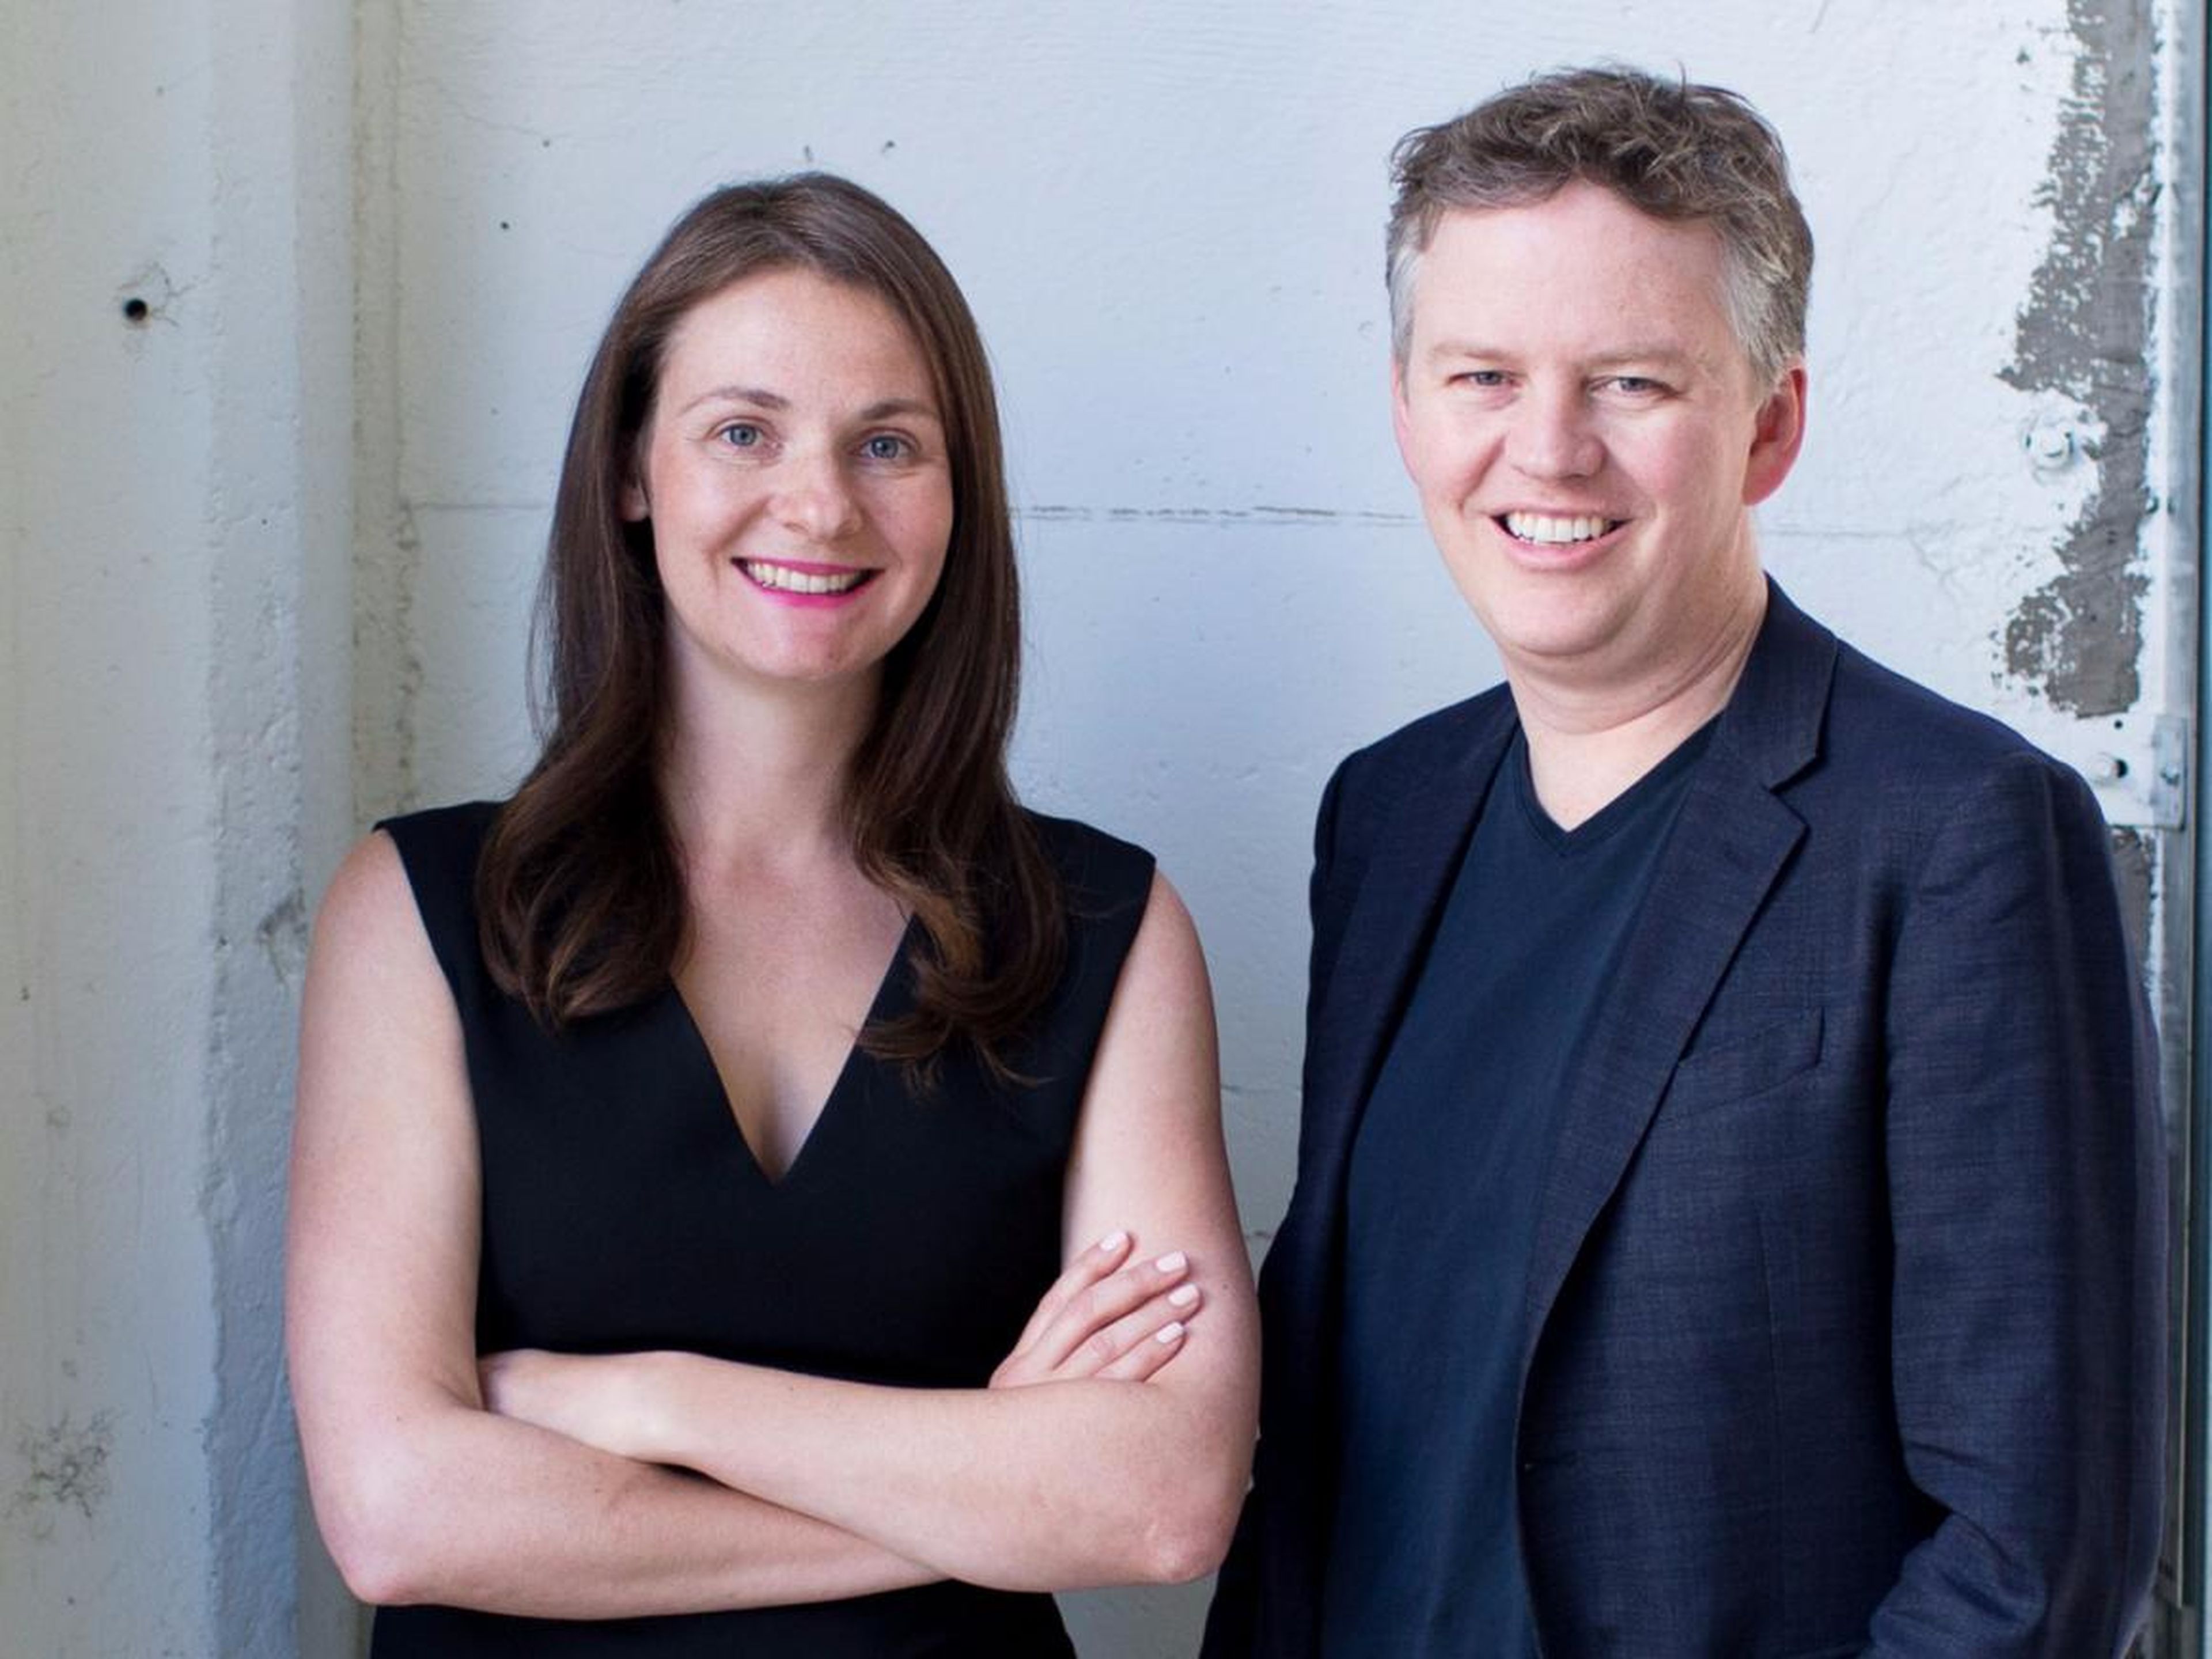 CloudFlare founders Michelle Zatlyn and Matthew Prince